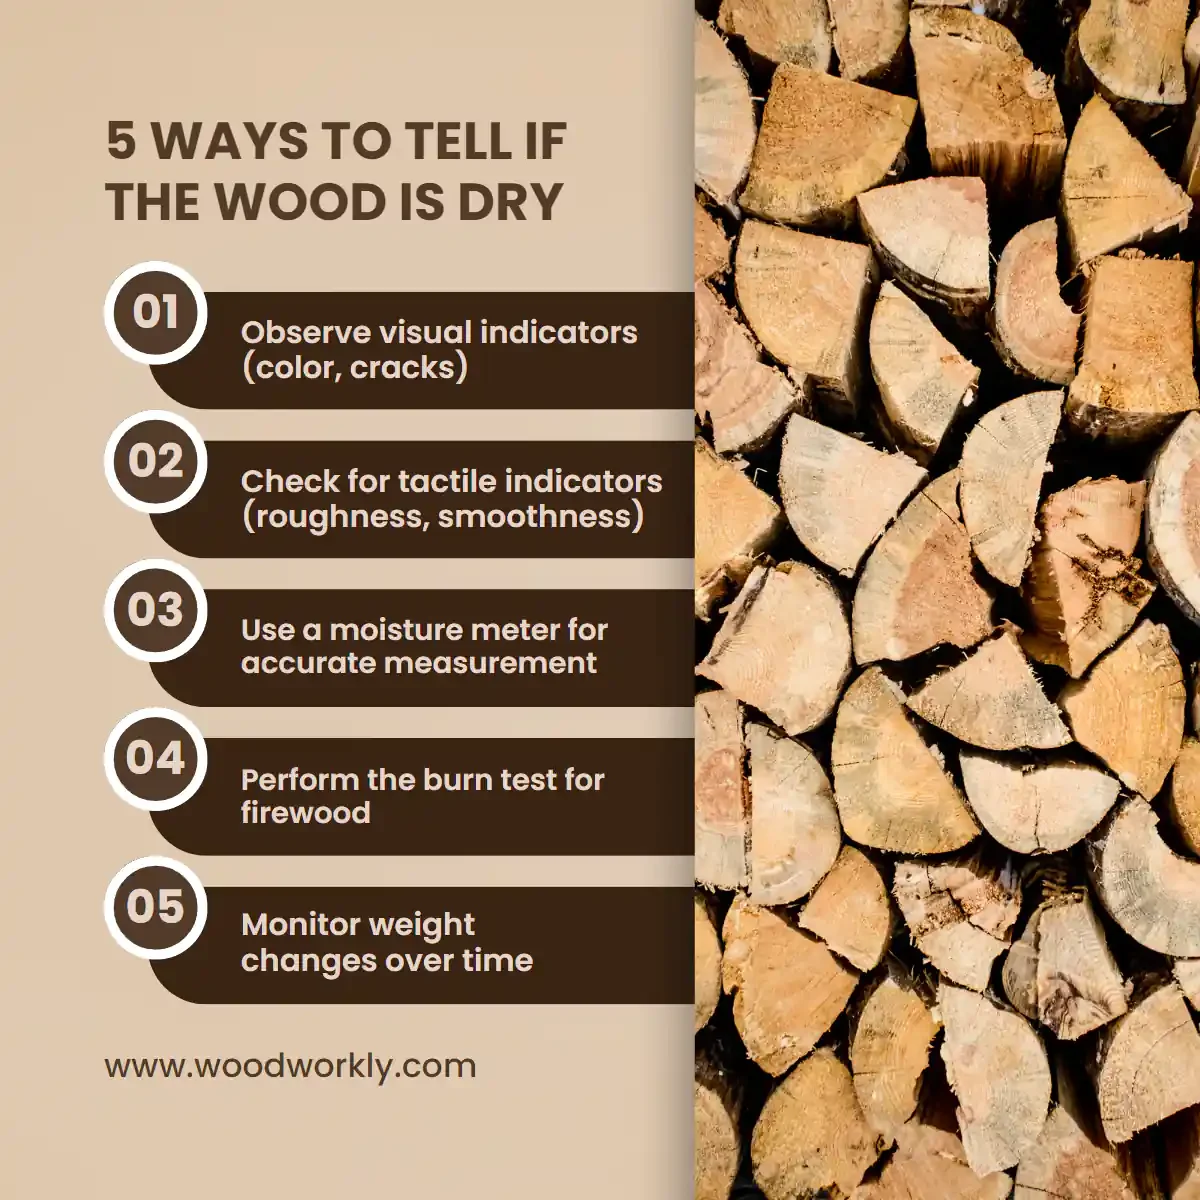 5 Ways to Tell If the Wood Is Dry